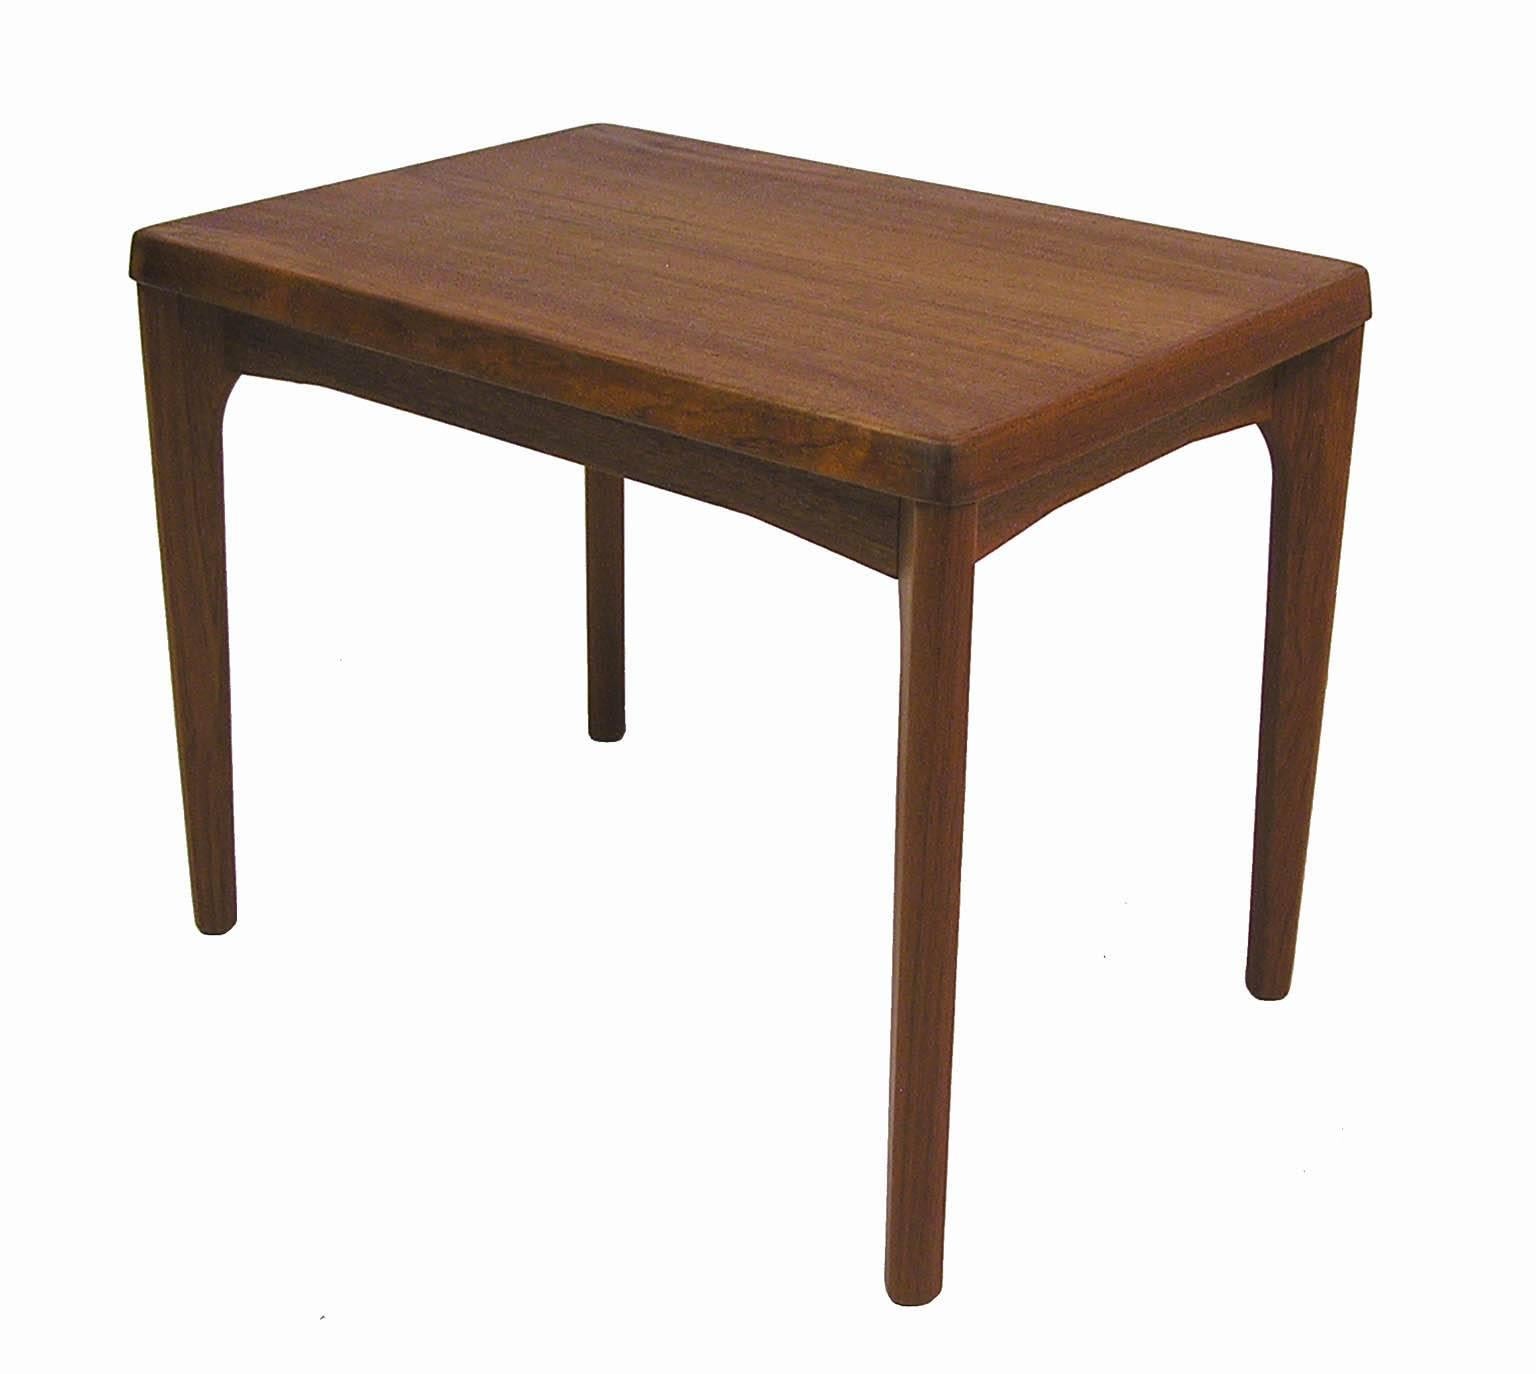 A gorgeous pair of teak side tables from the 1960s designed by Henning Kjaernulf for Vejle Stole Mobelfabrik of Denmark. Quality craftsmanship throughout featuring clean Danish modern era lines with a sculpted solid teak edge and legs. Overall